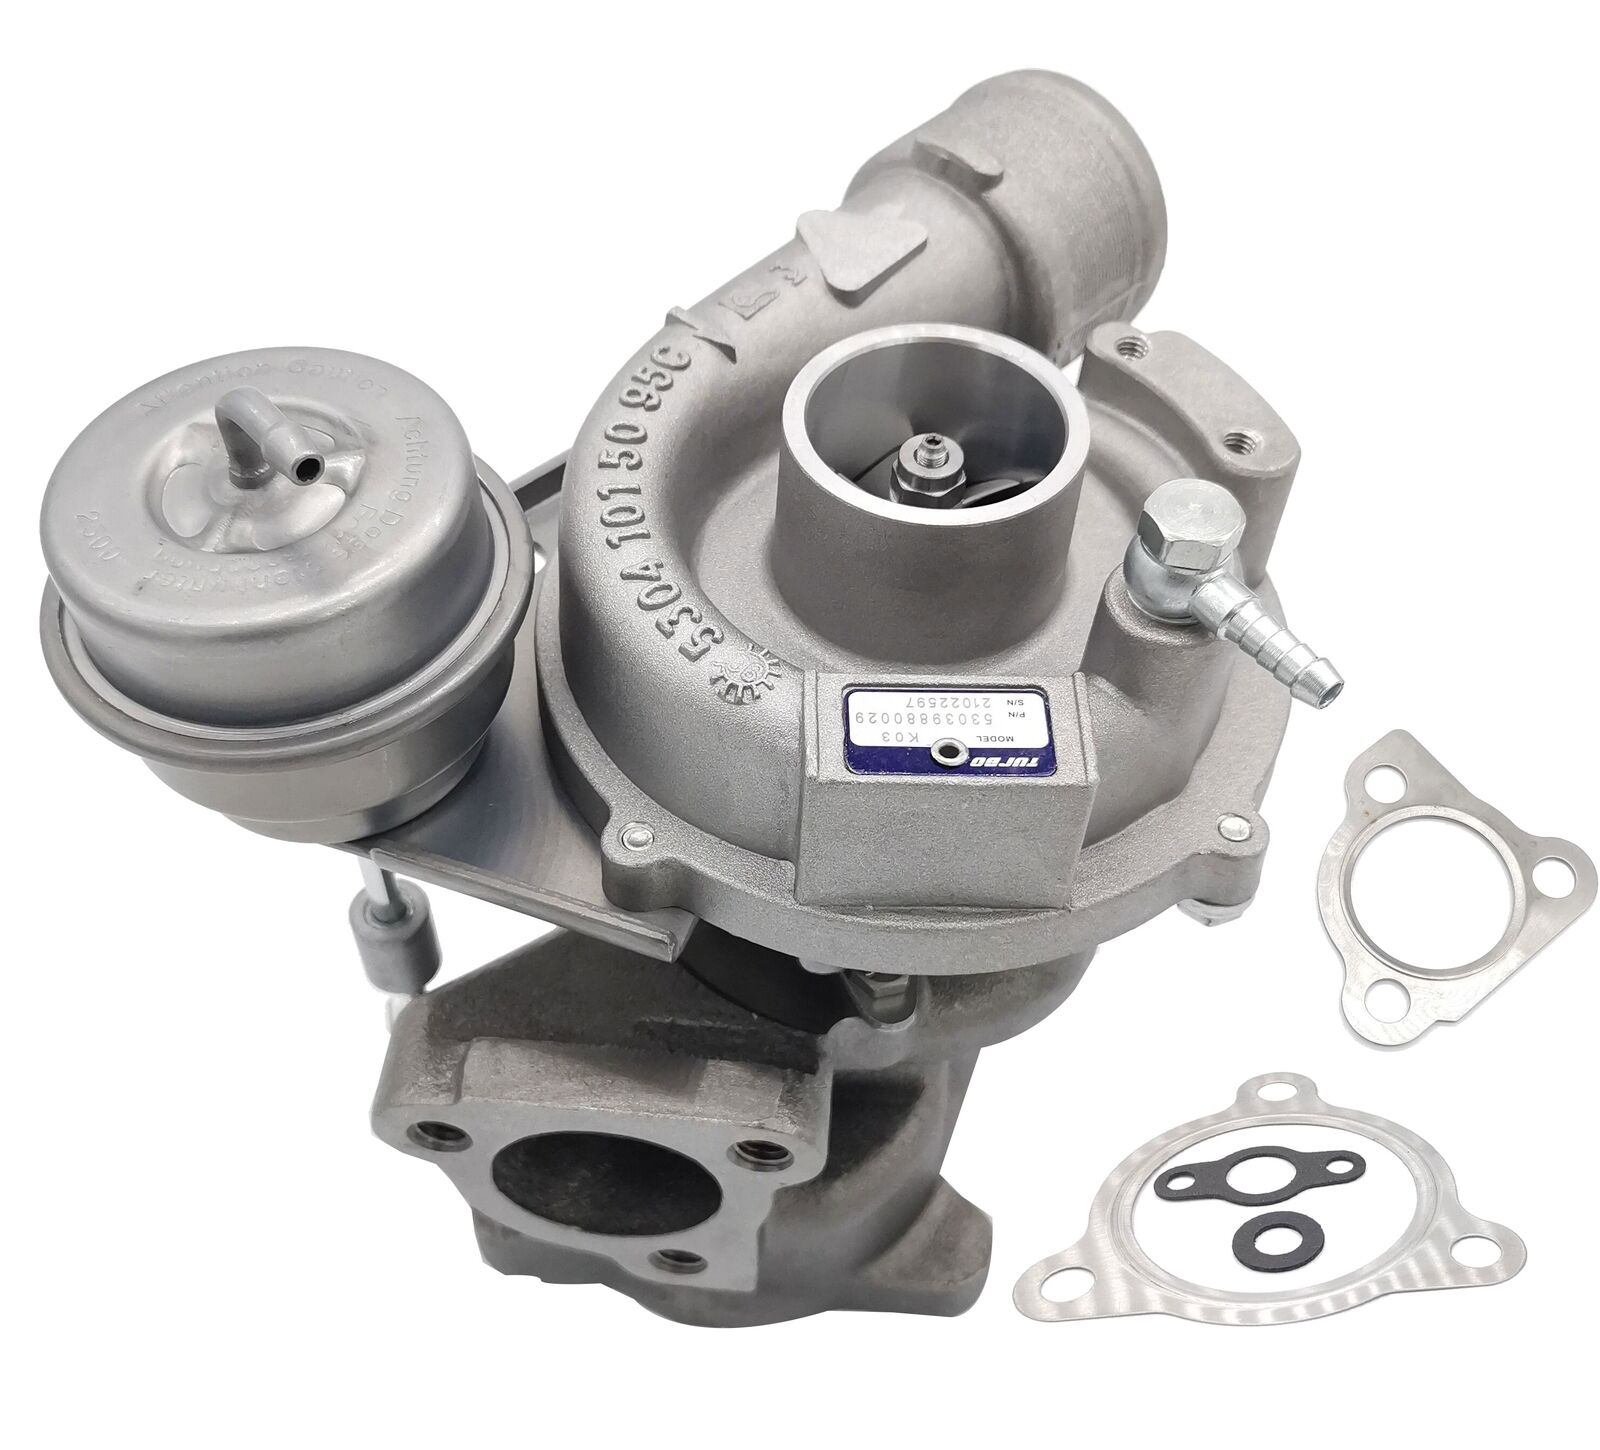 K03 Ko3 Replacement Turbocharger Turbo 1.8L for VW Volkswagen Passat and Audi A4